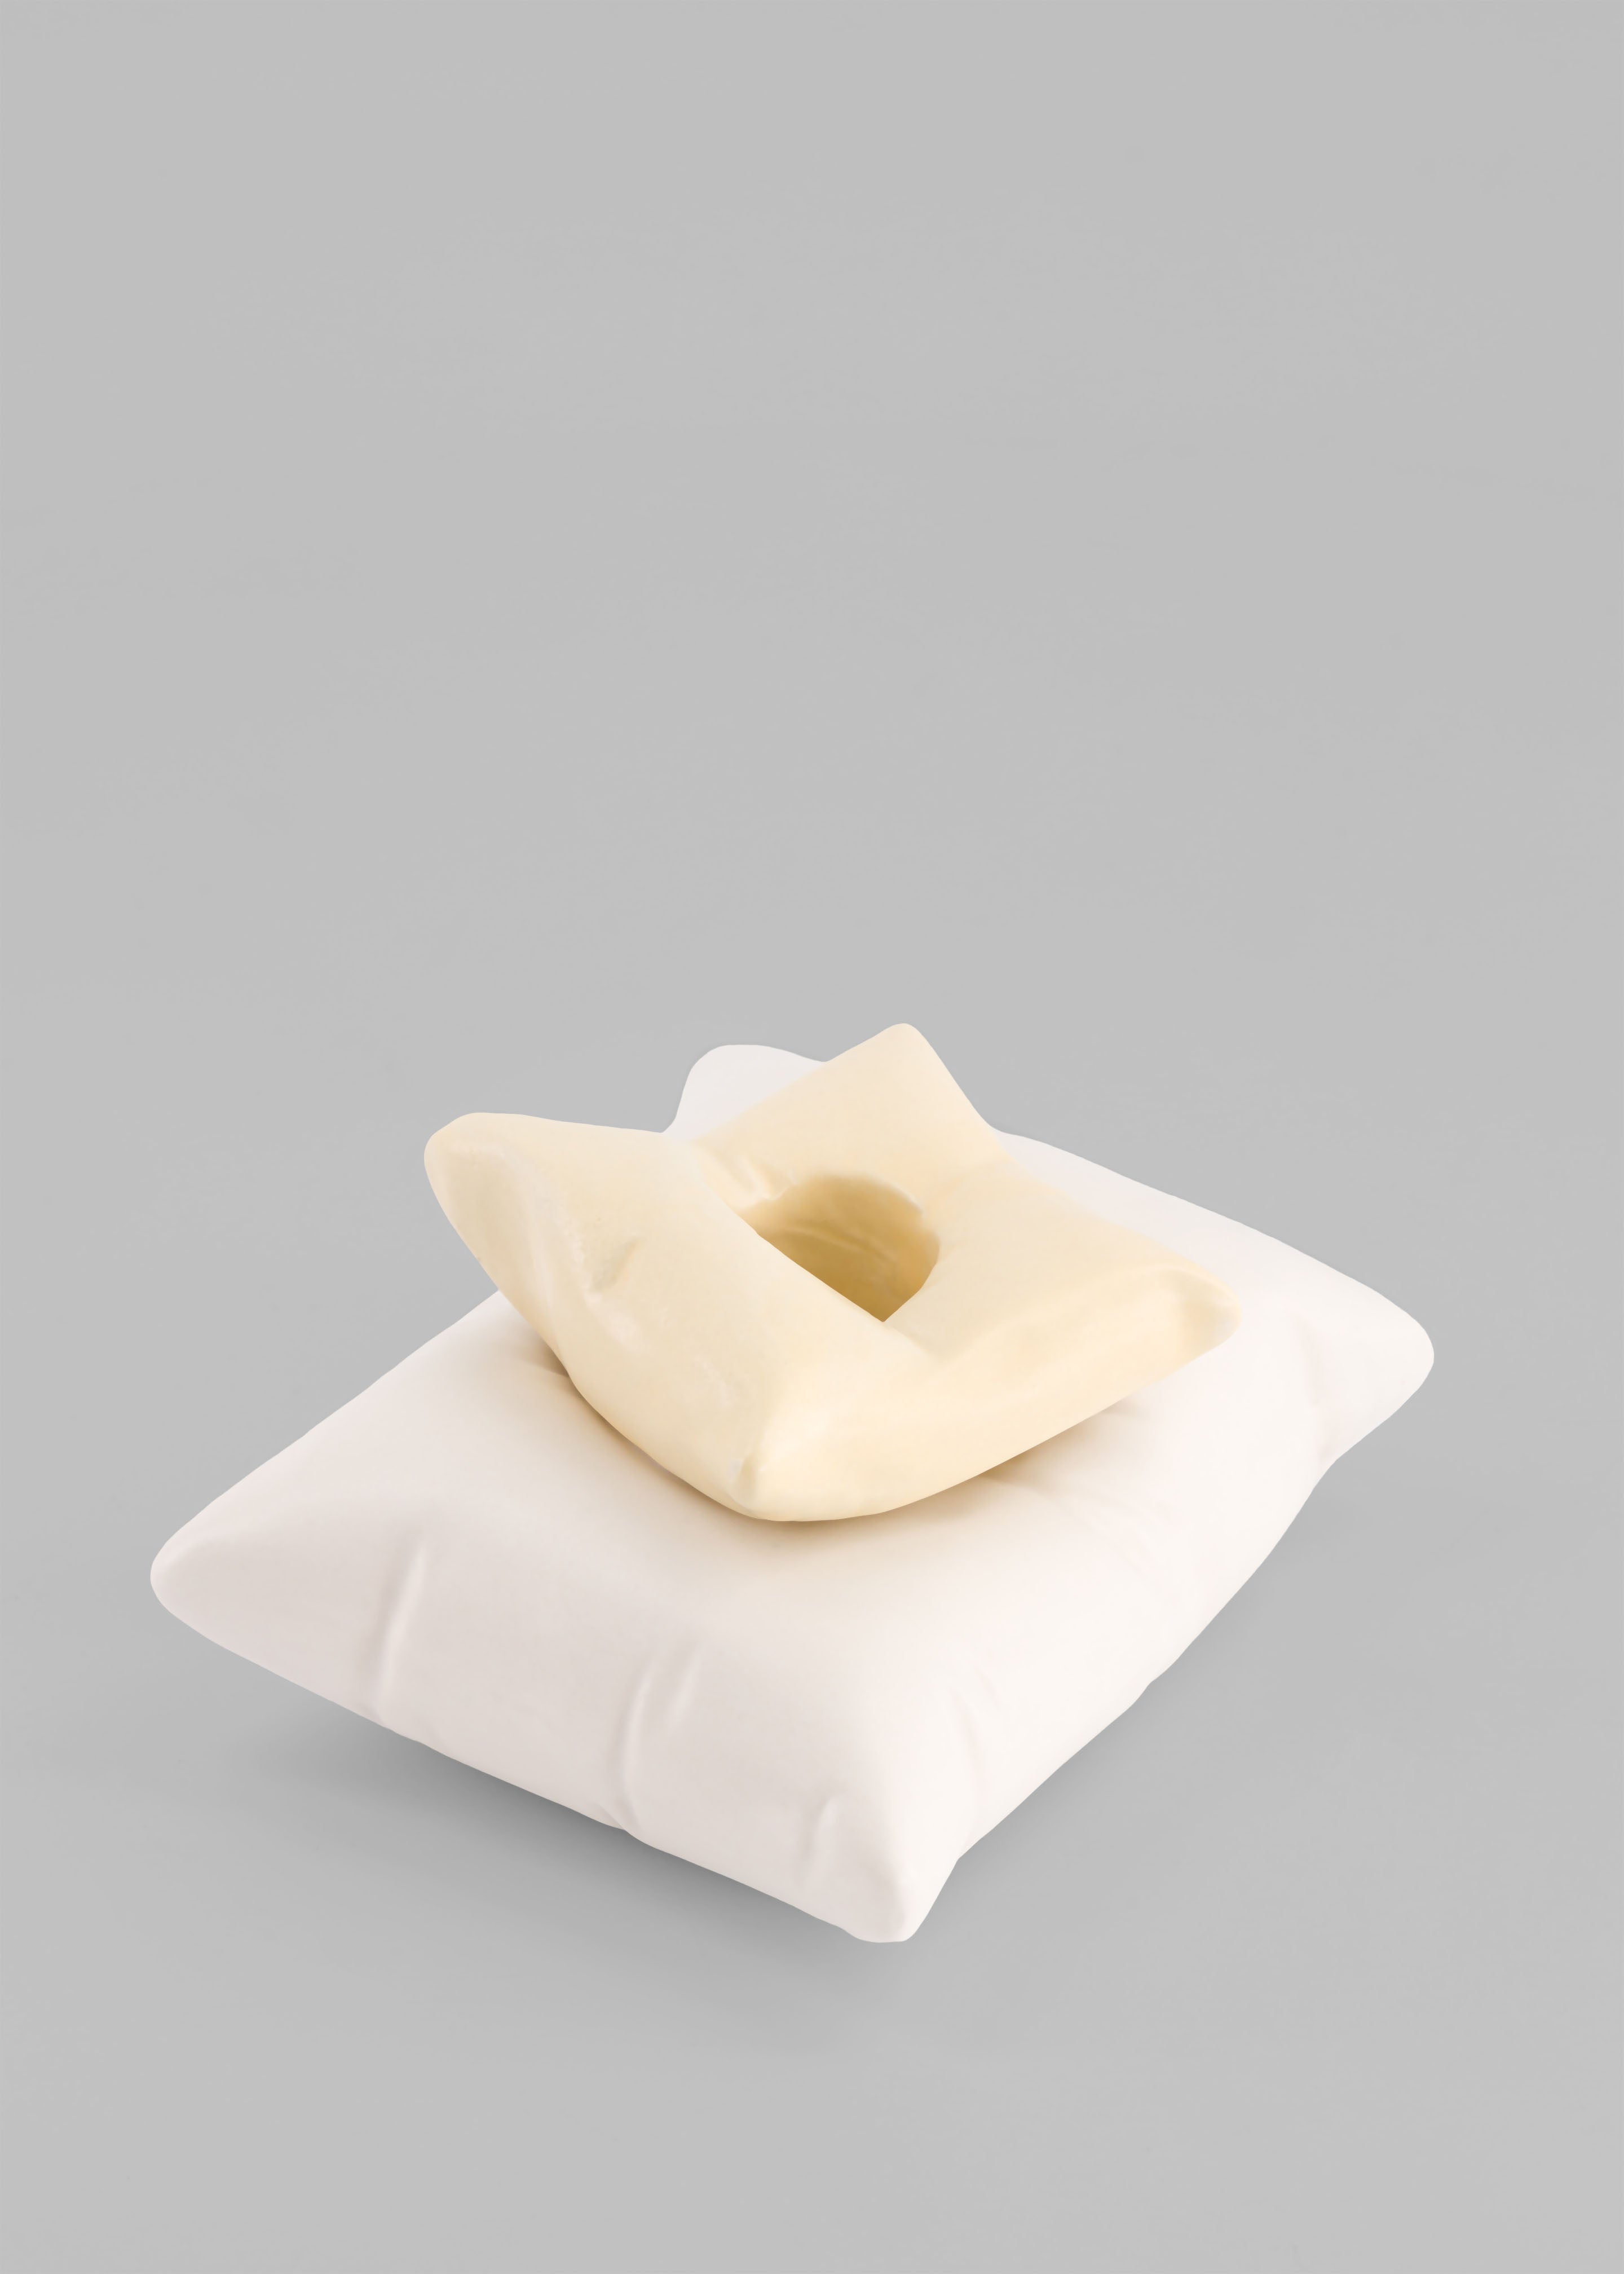 Completedworks Stacked Cushion Candle Holder - Matte White/Yellow - 2